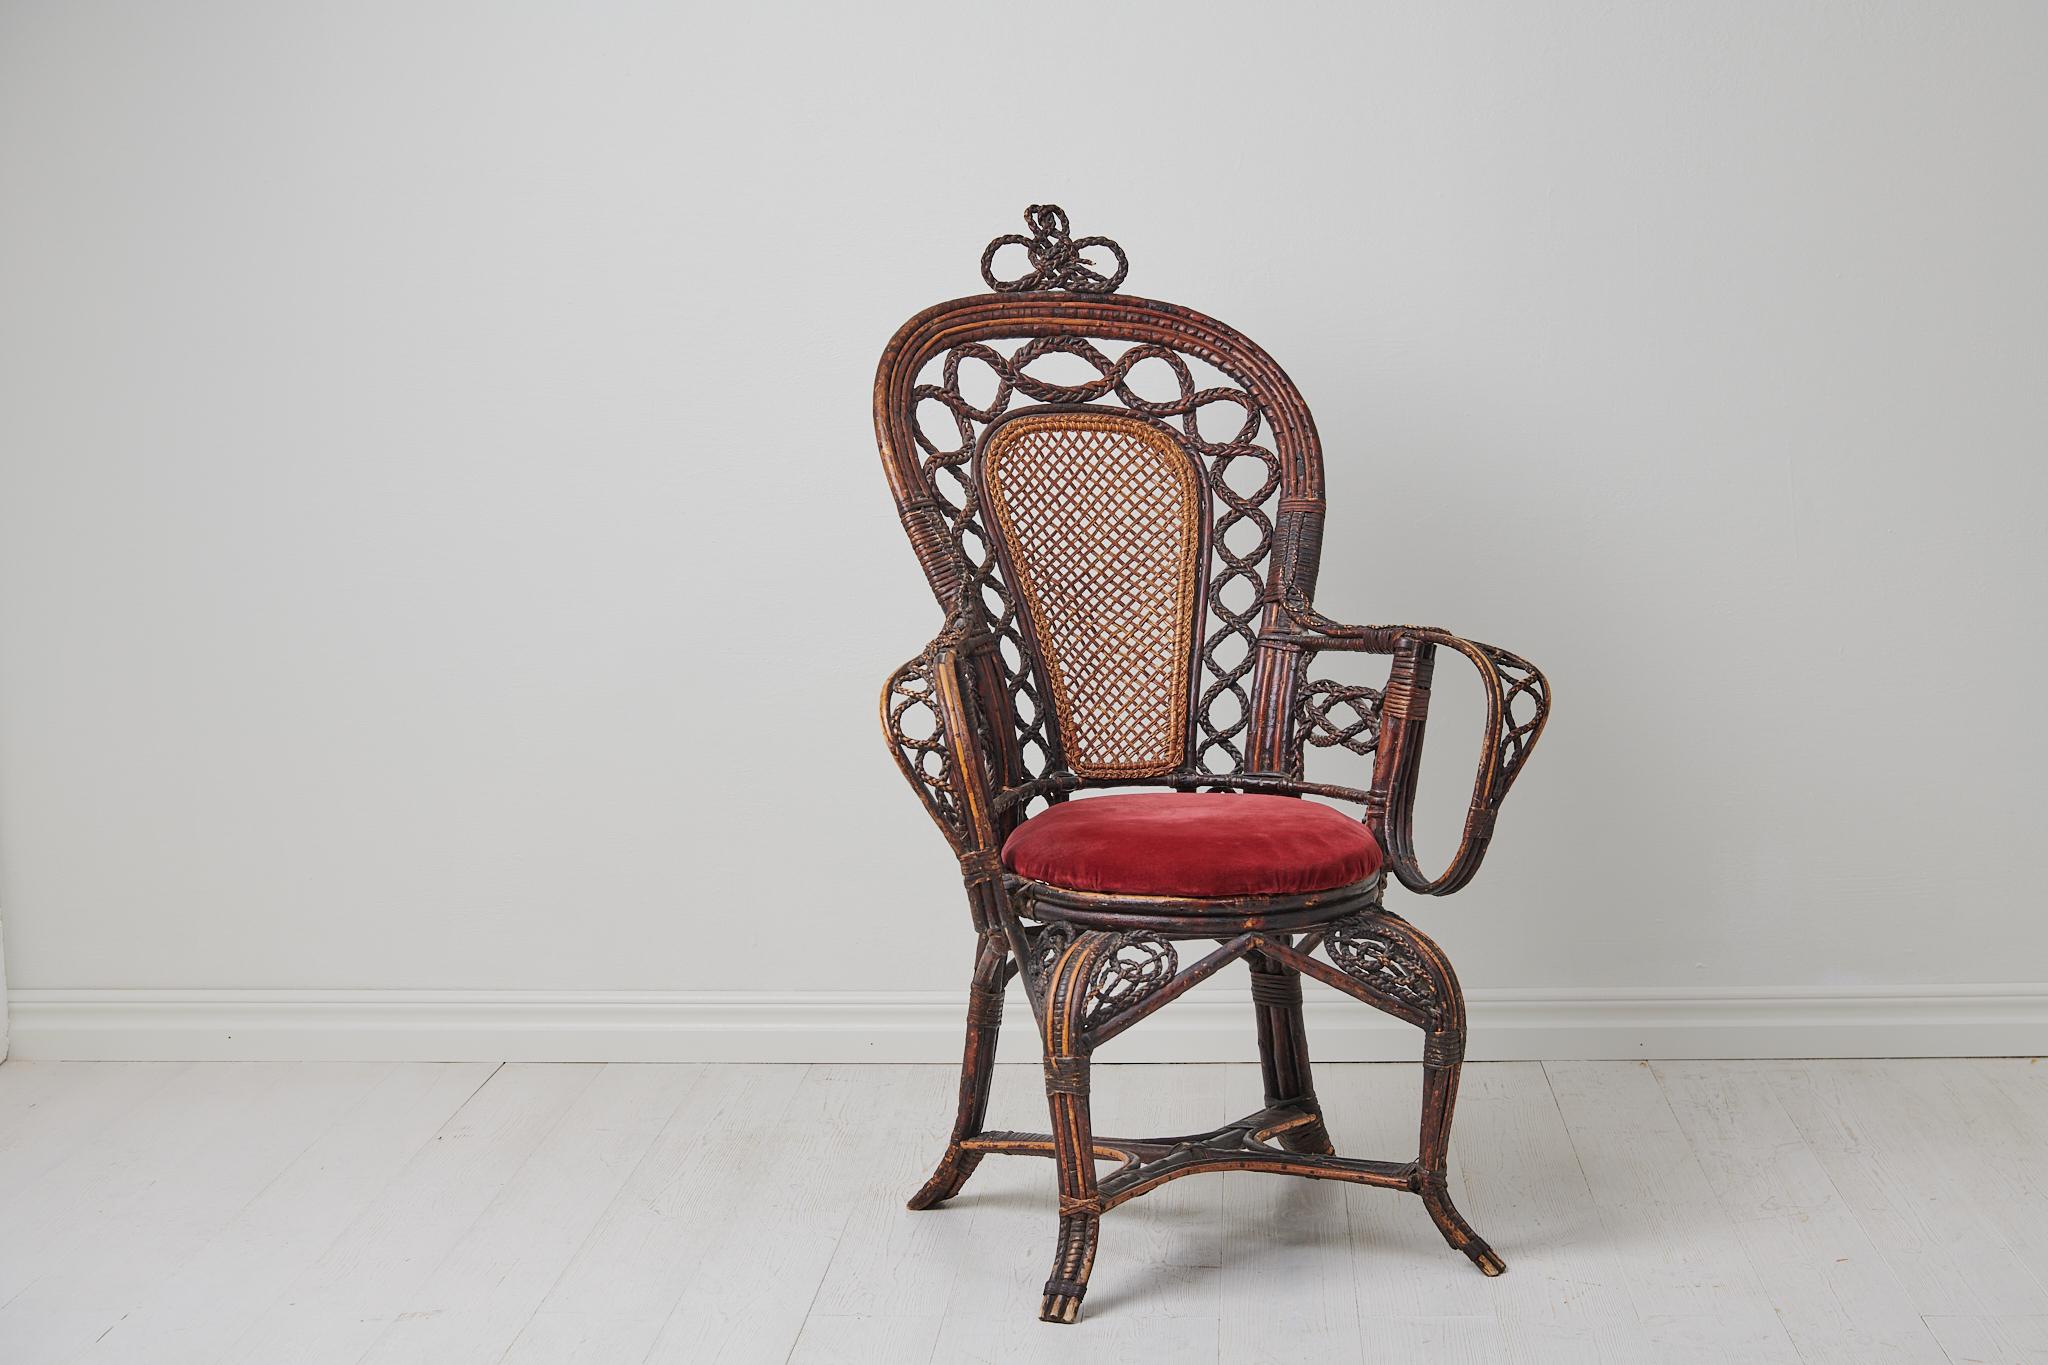 Antique woven basket chair from Sweden made around the late 1800s. The chair is an unusual find with an eclectic collection of different weaving styles and techniques. The appearance of the chair is unmistakably antique and it can both be used to